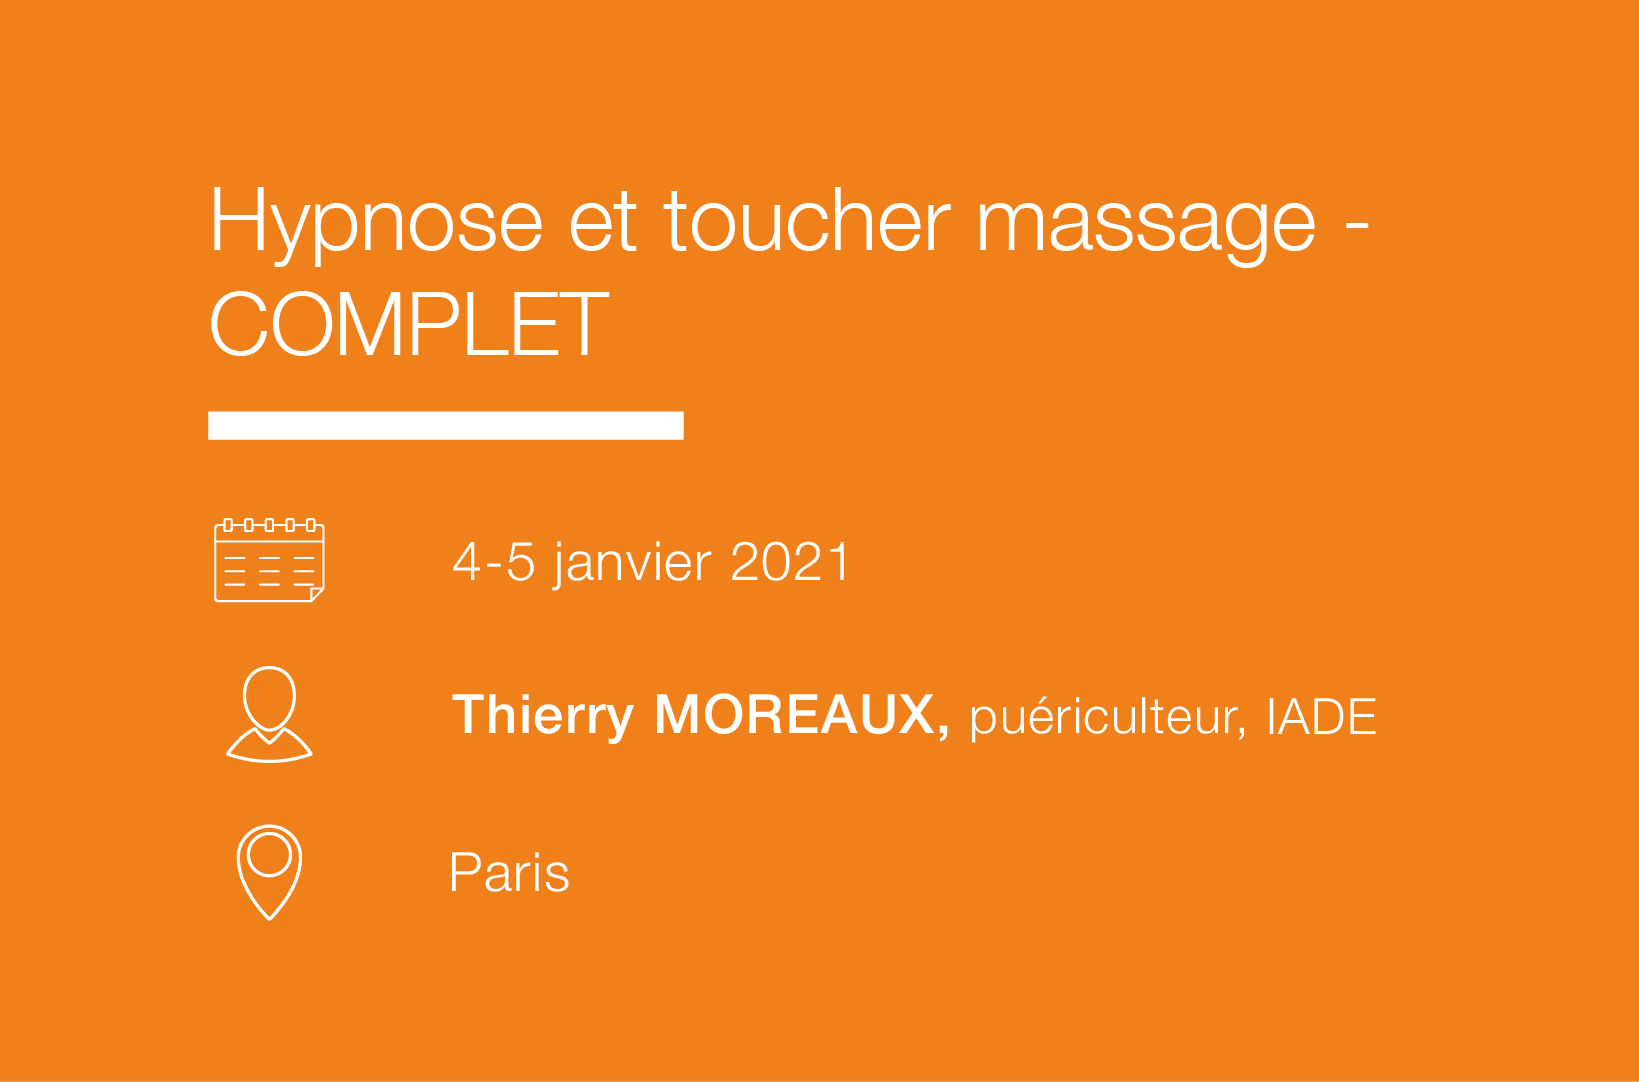 Formation Seminaire Hypnose-Toucher-Massage-IFH